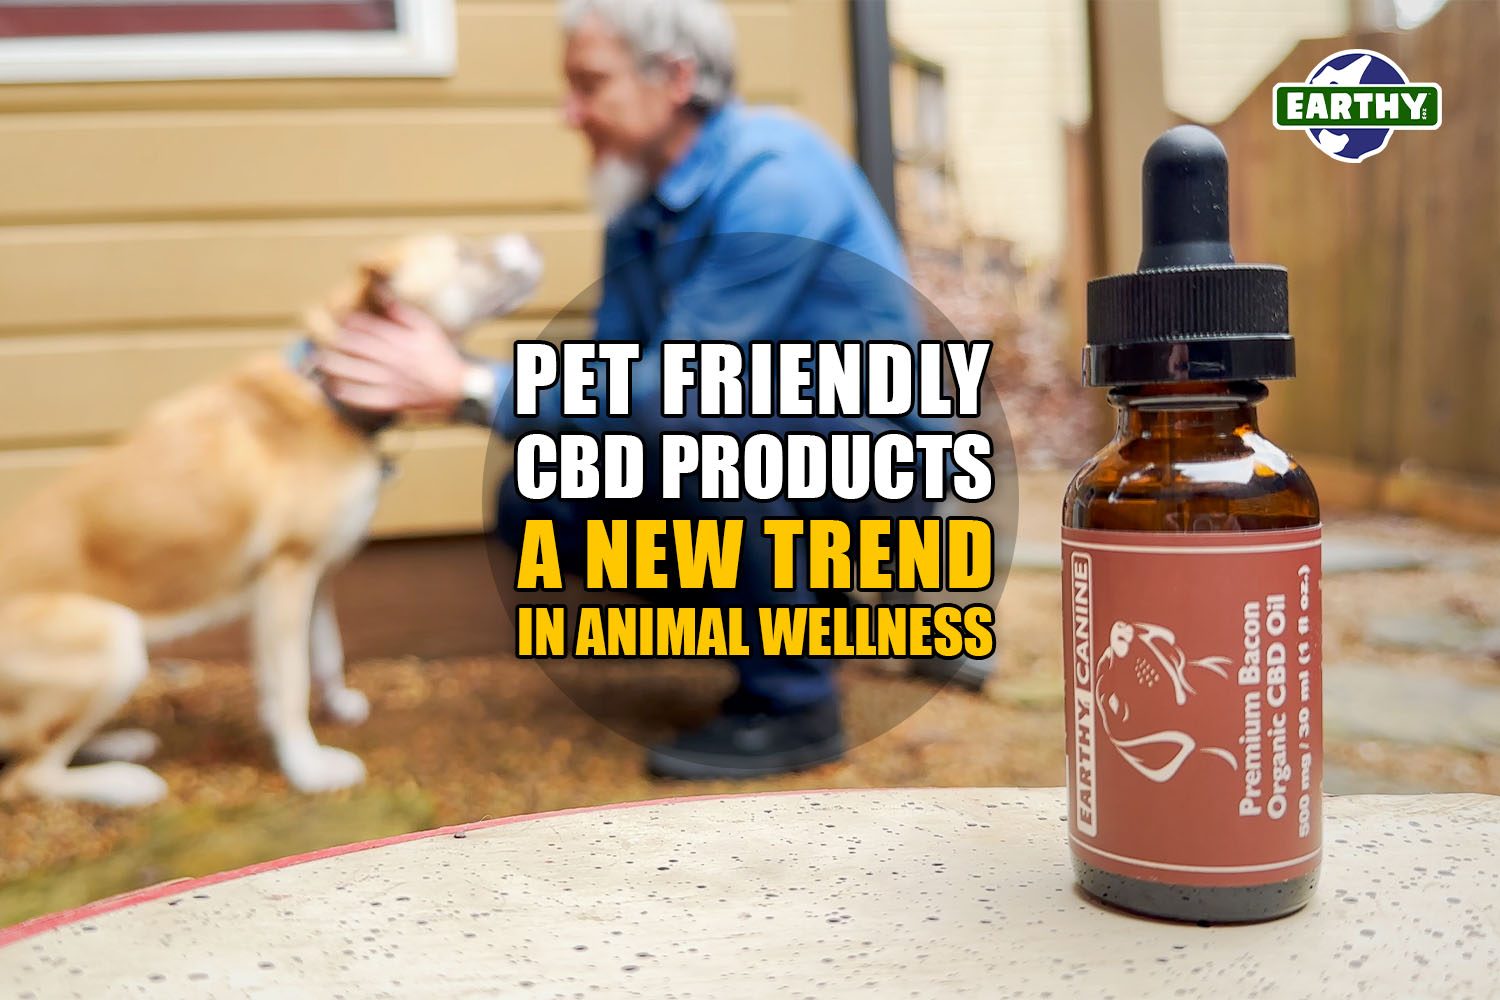 Pet-friendly CBD Products: A New Trend in Animal Wellness | Earthy Now